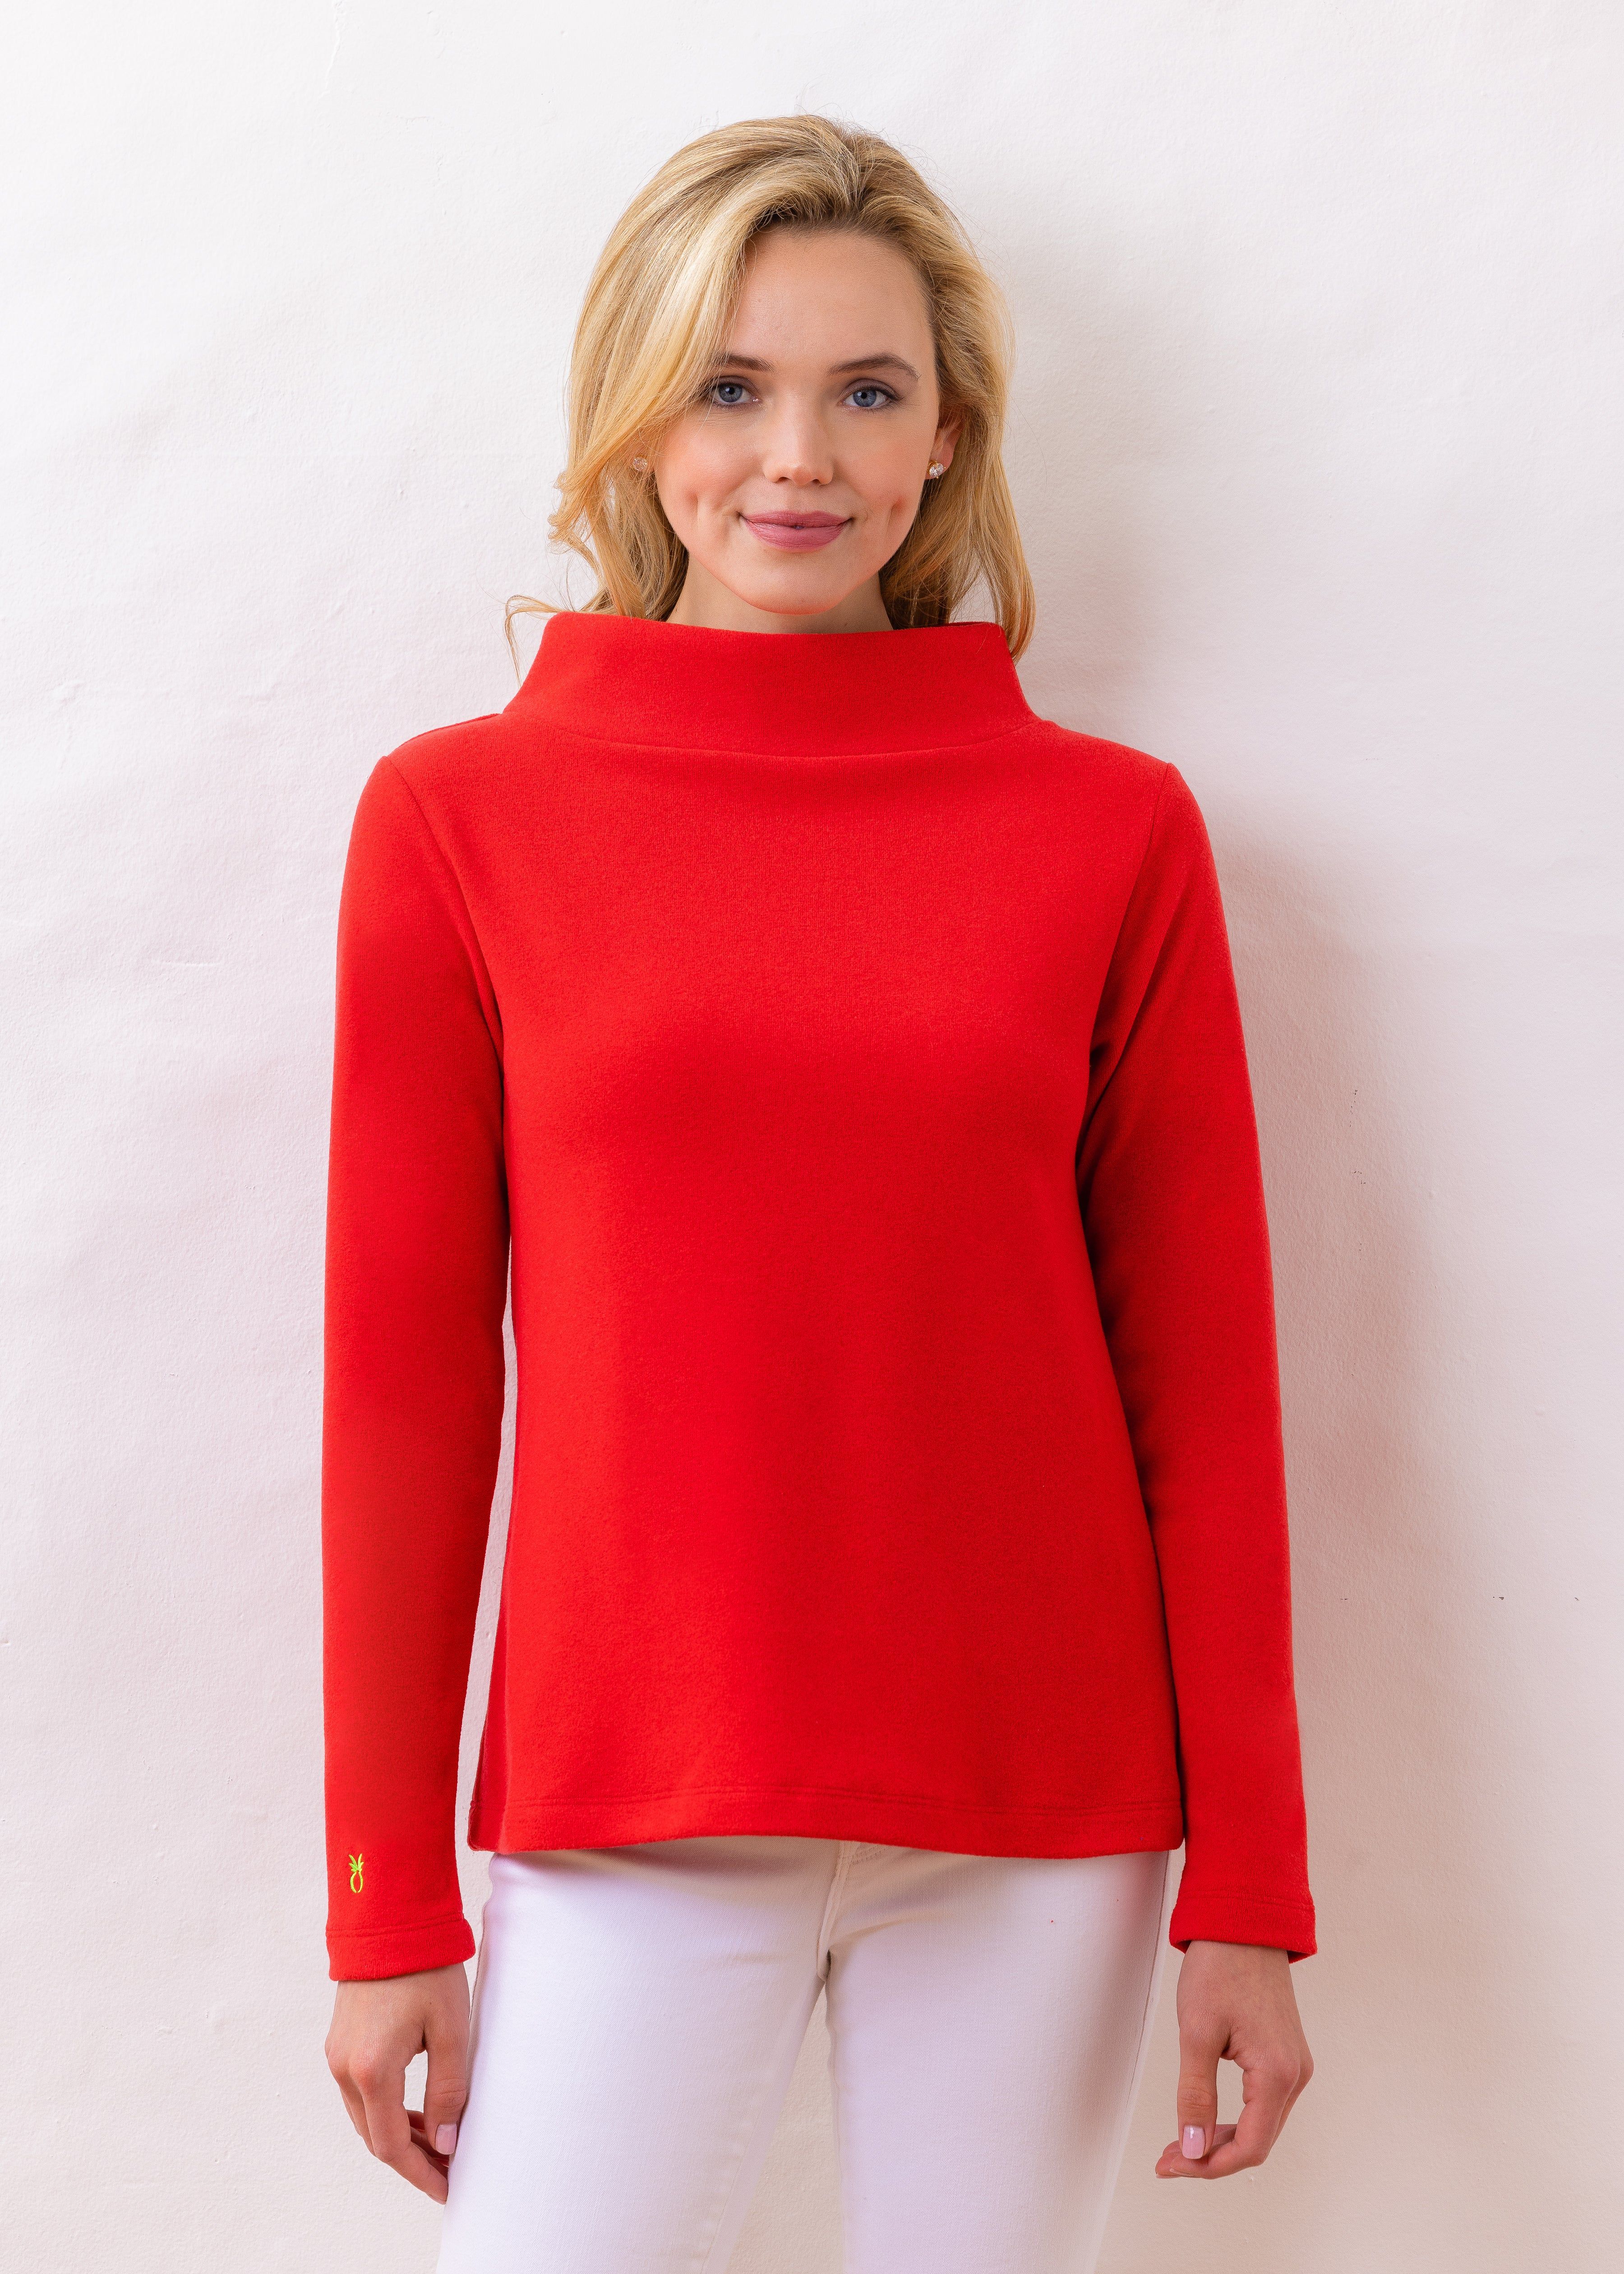 Greenpoint Boatneck in Terry Fleece (Red) | Dudley Stephens